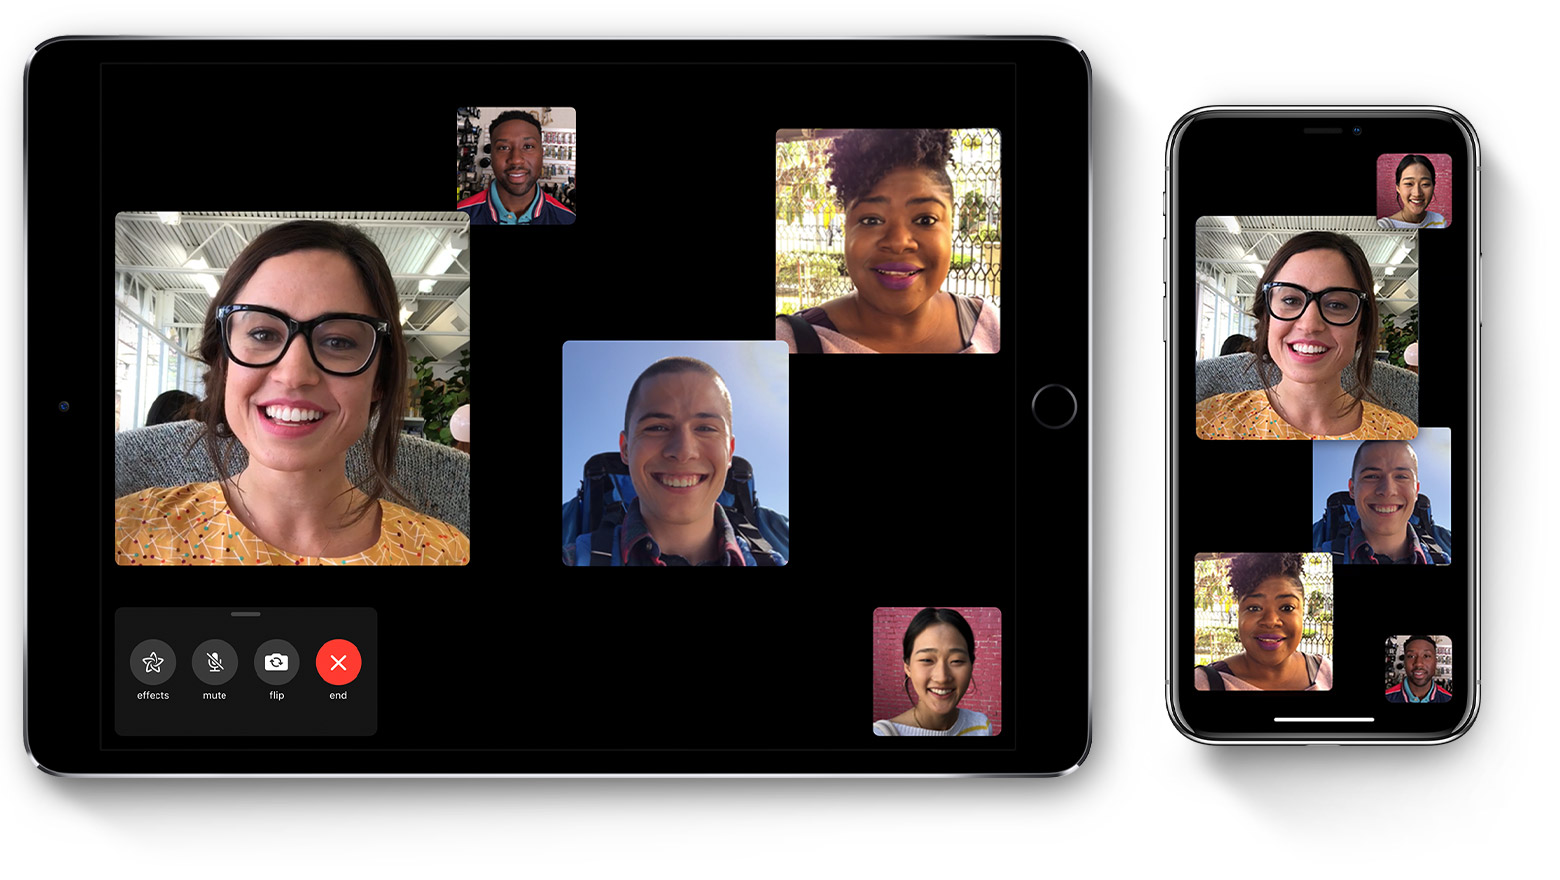 how to download facetime on mac for free